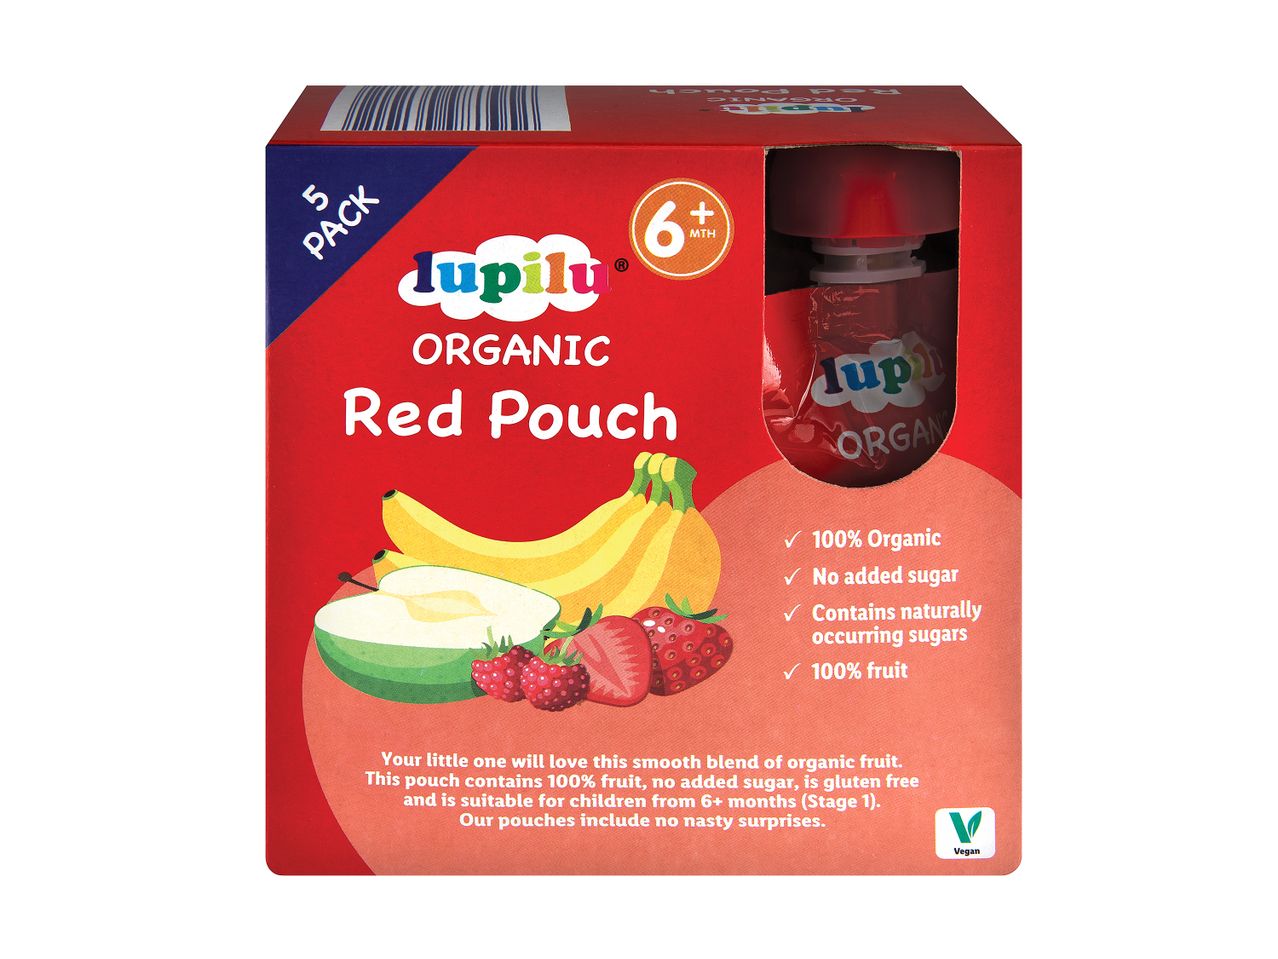 Go to full screen view: Lupilu Organic Baby Red Pouches - Image 1